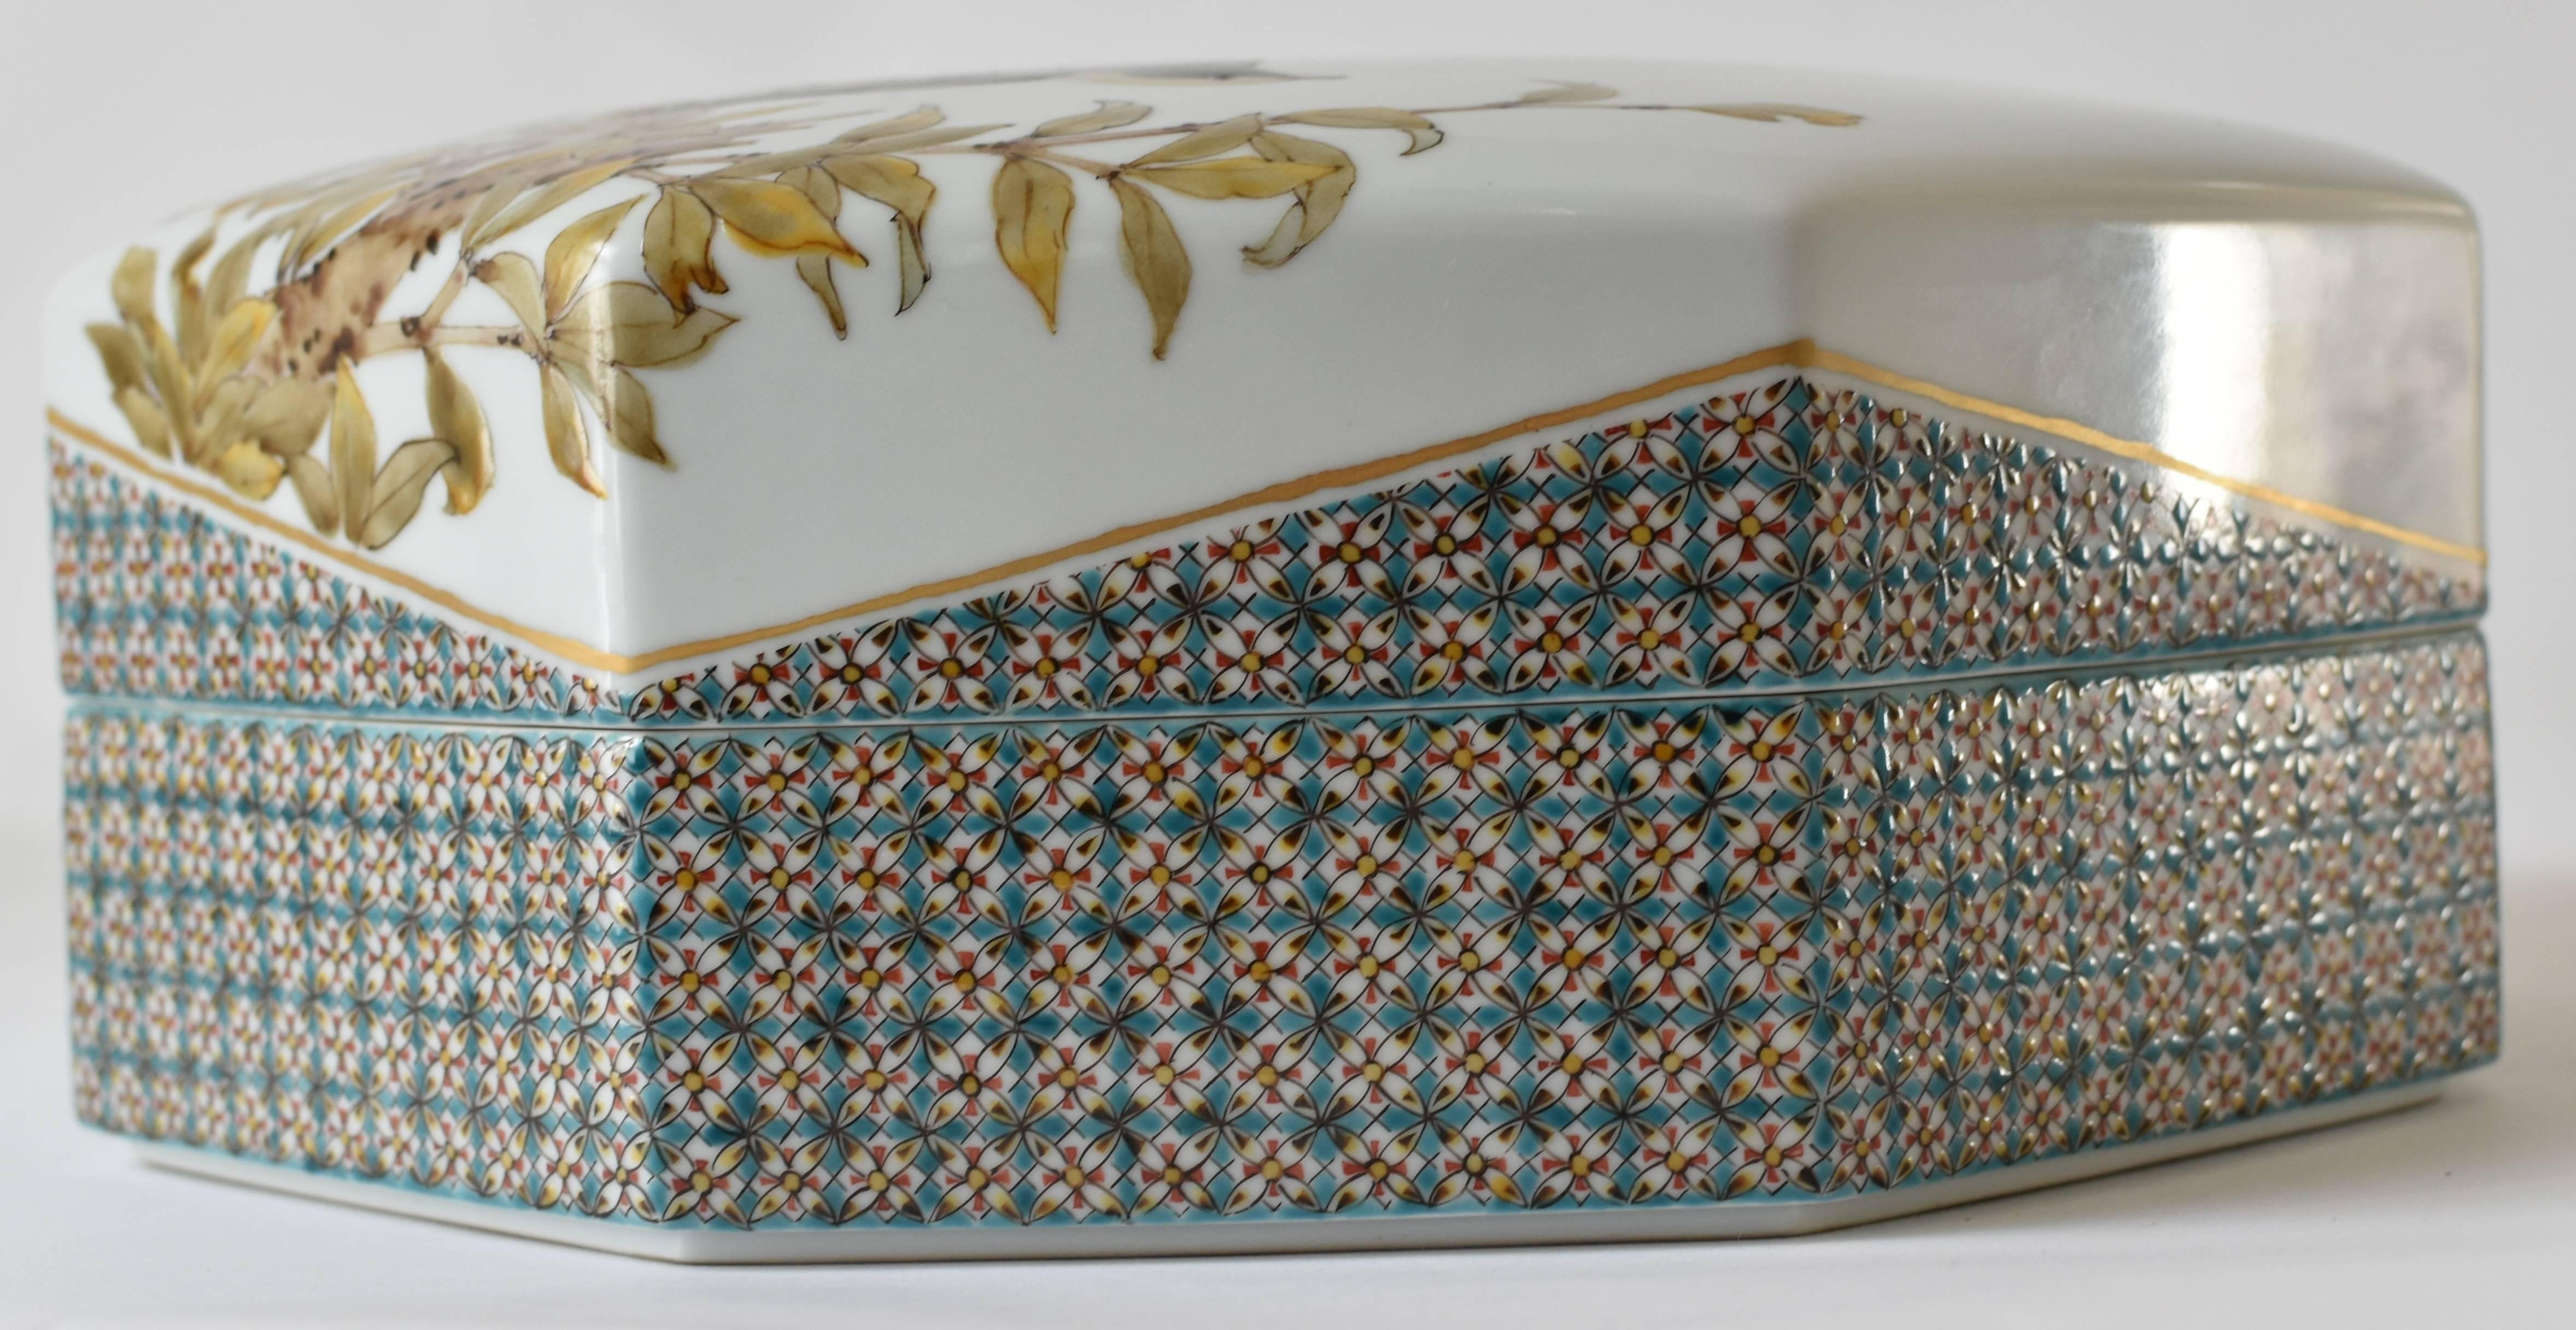 Magnificent Japanese contemporary decorative porcelain box/centerpiece, a highly collectible exhibition piece extremely intricately hand-painted in vivid blue, orange and green on a stunning octagonal shape body, a signed masterpiece by highly